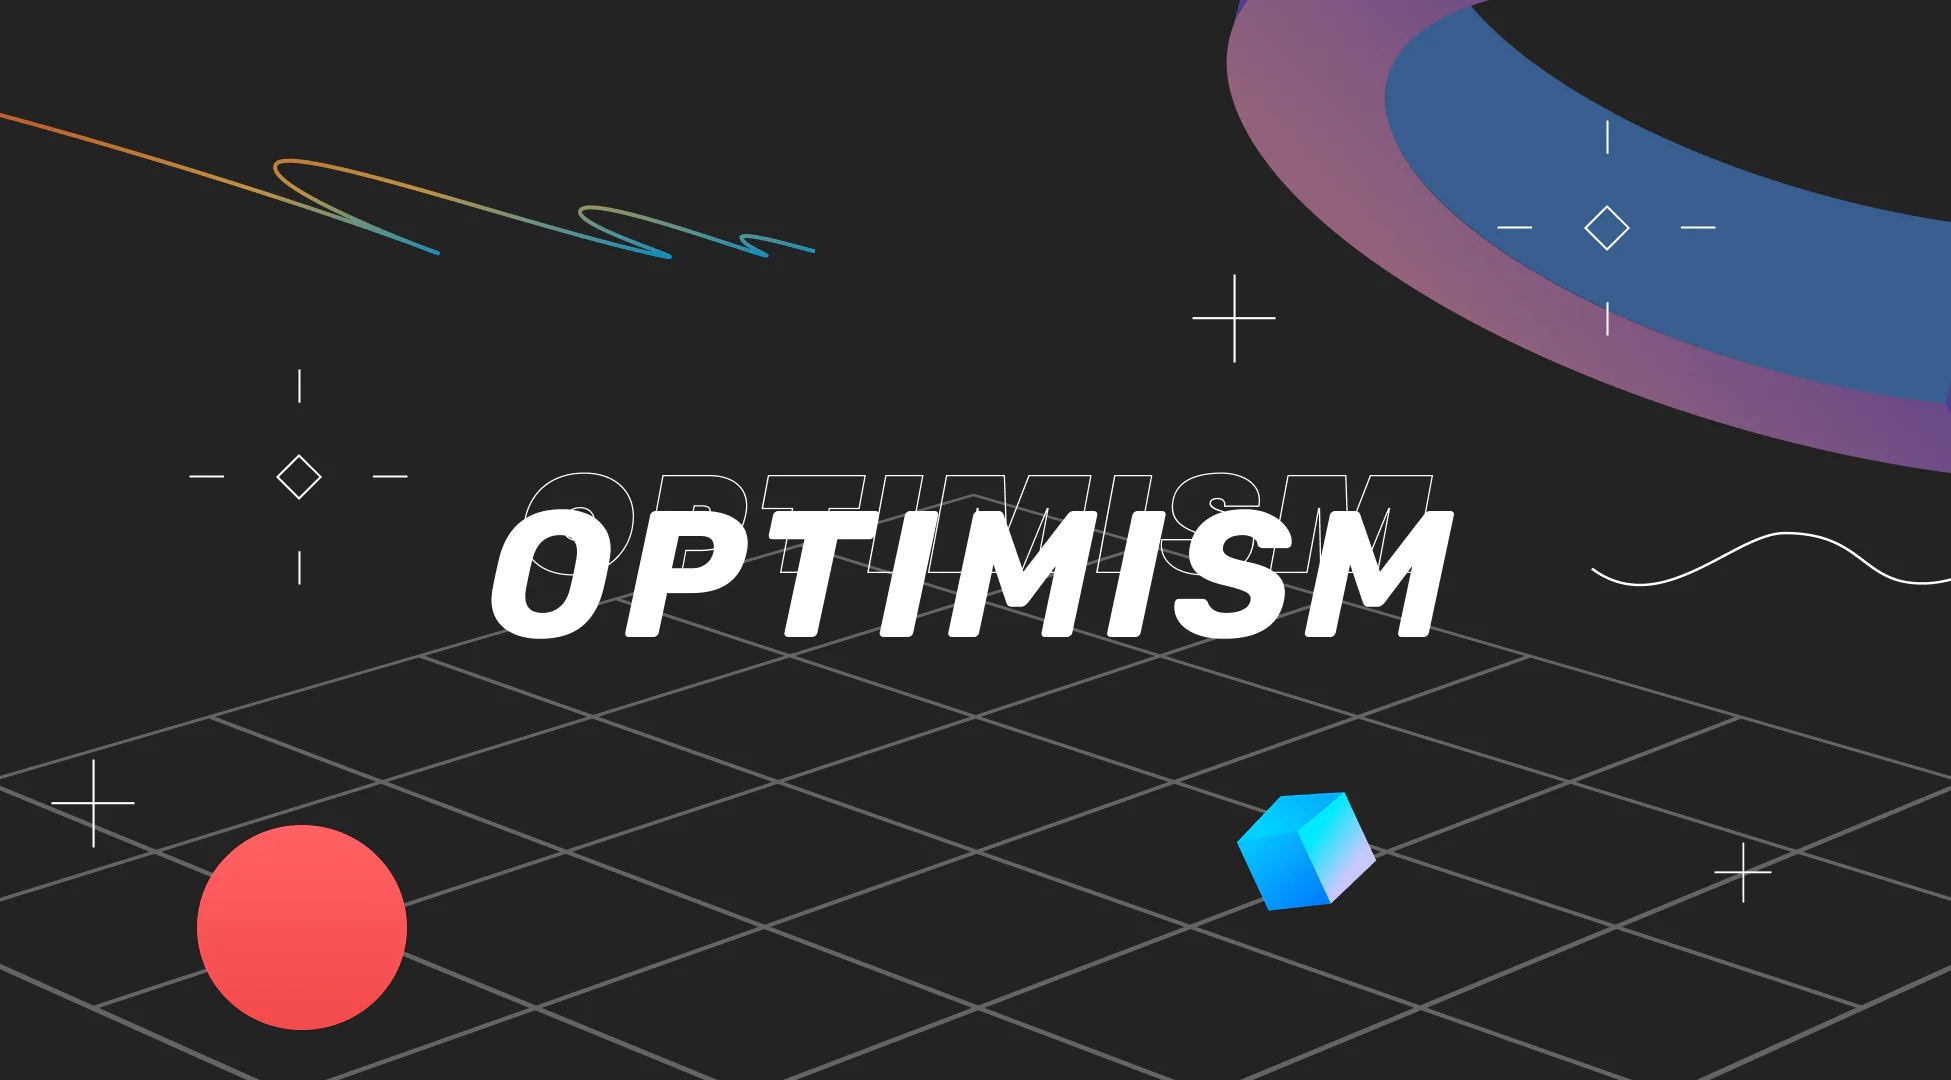 What is Optimism?
